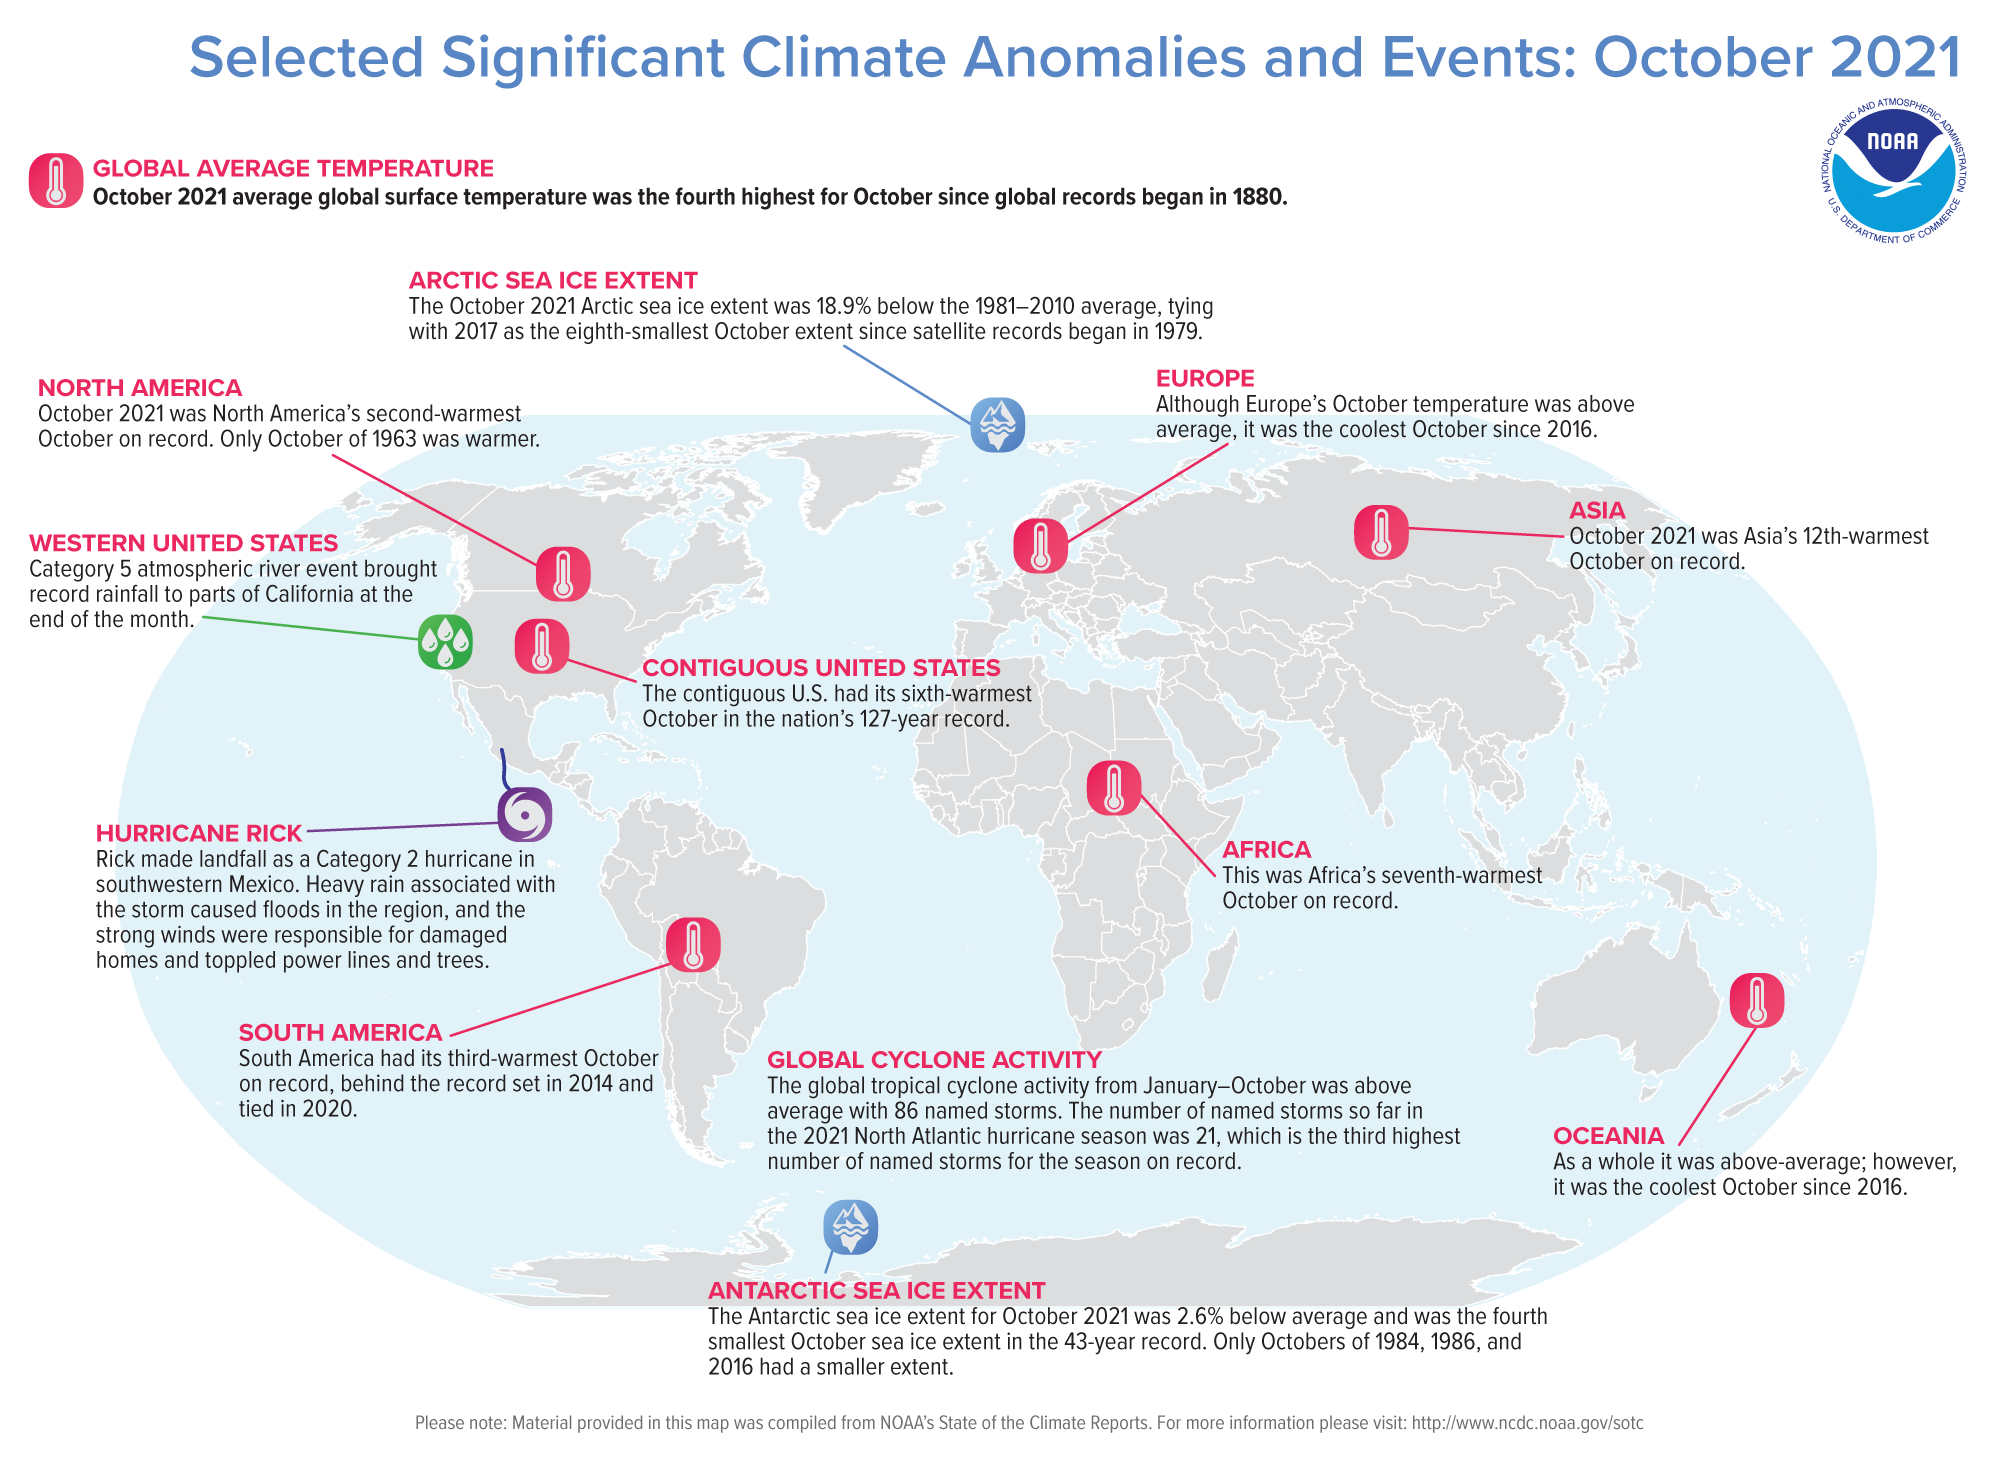 A map of the world plotted with some of the most significant climate events that occurred during October 2021.